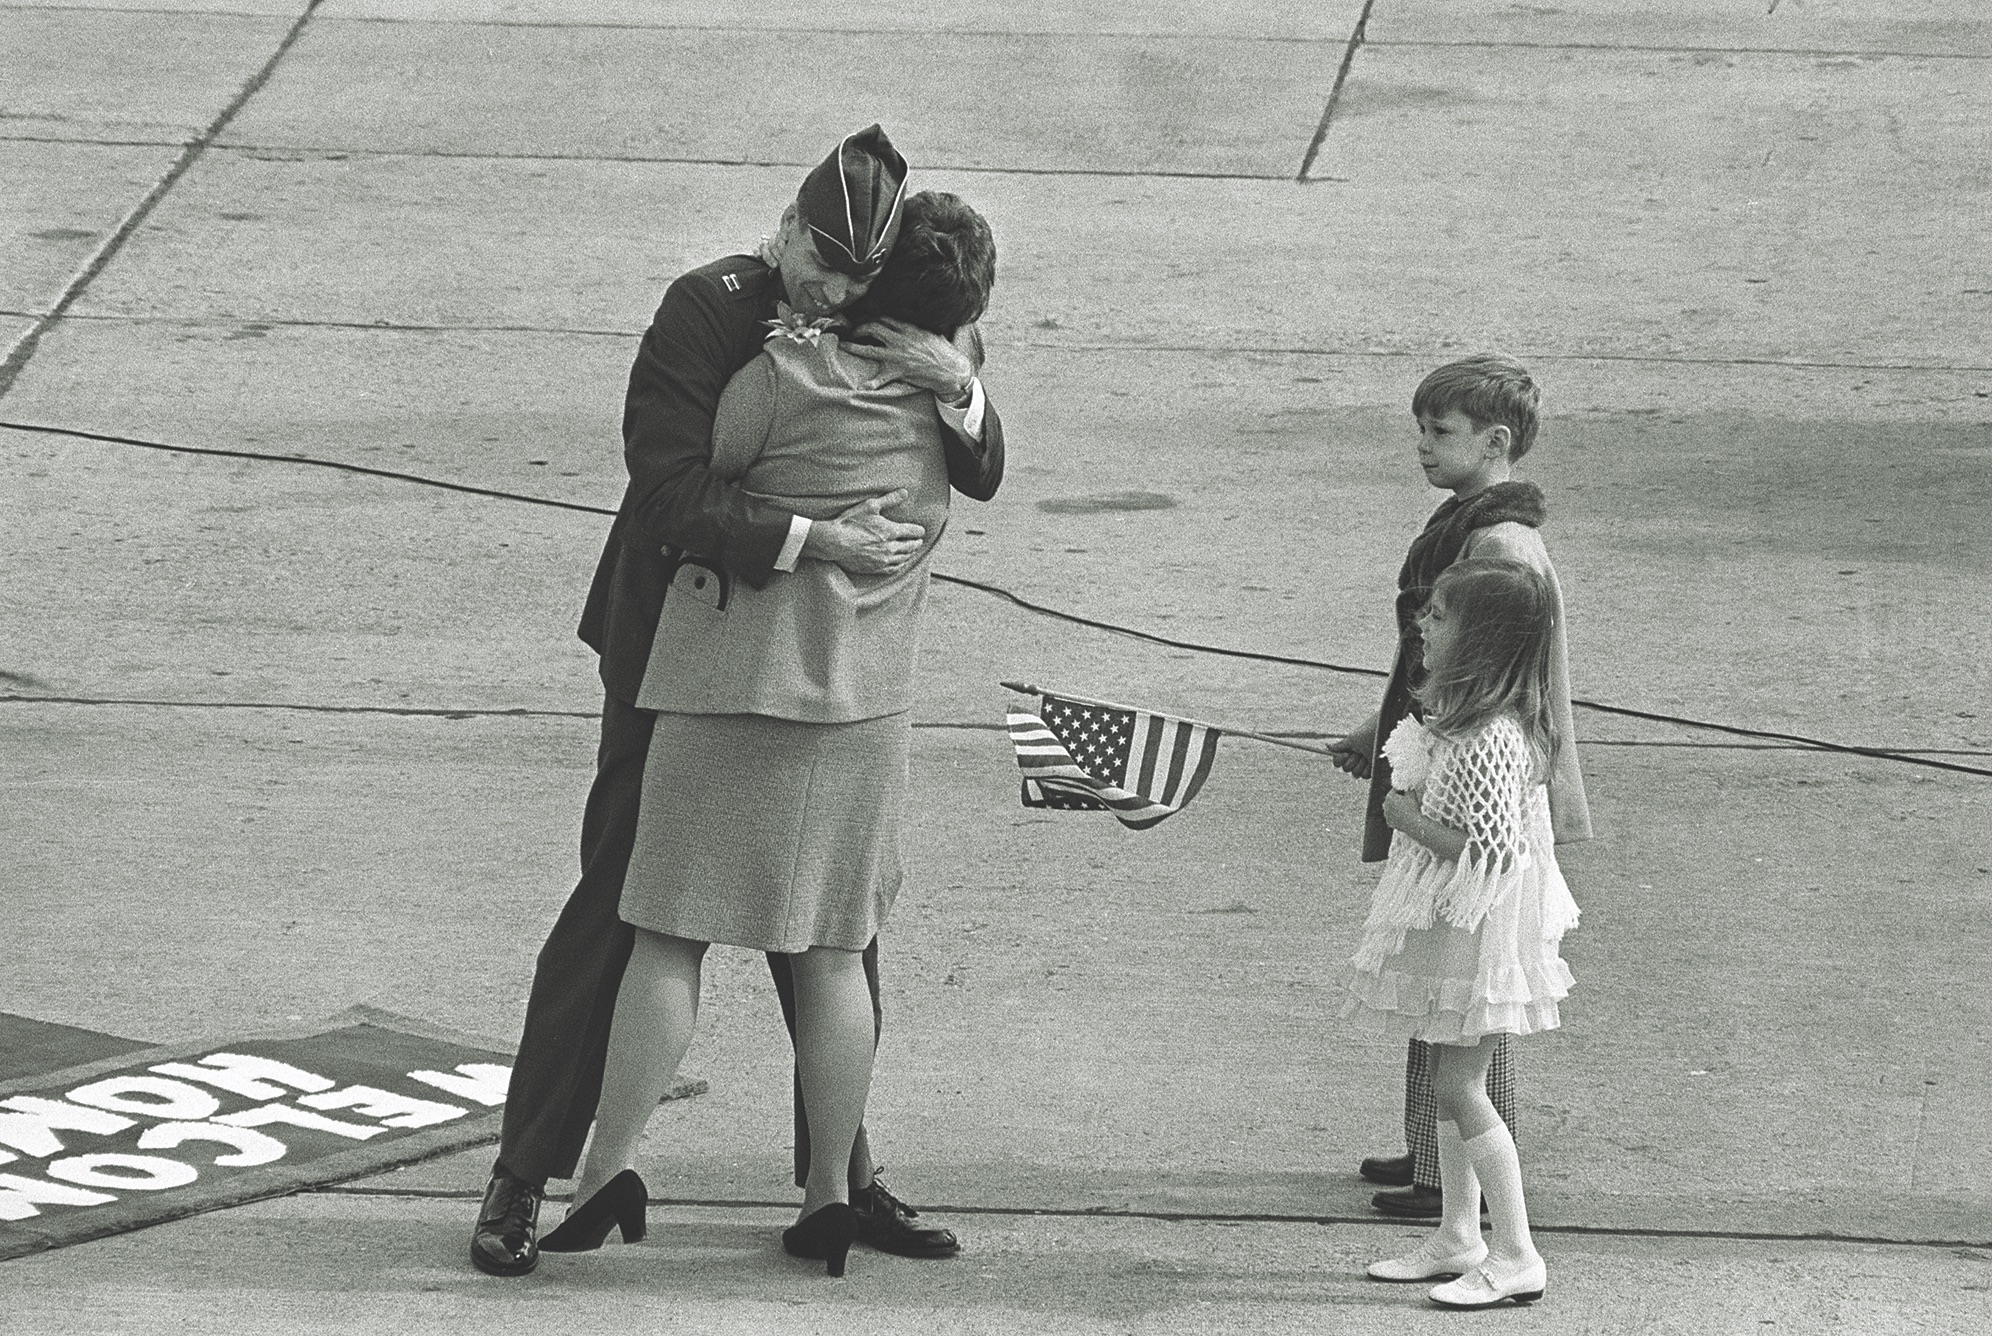 Air Force Capt. Michael S. Kerr, captured in 1967, has an emotional homecoming with wife Jerri on March 7, 1973, at Travis Air Force Base in California. The Kerrs later divorced. (Bettmann/Getty Images)